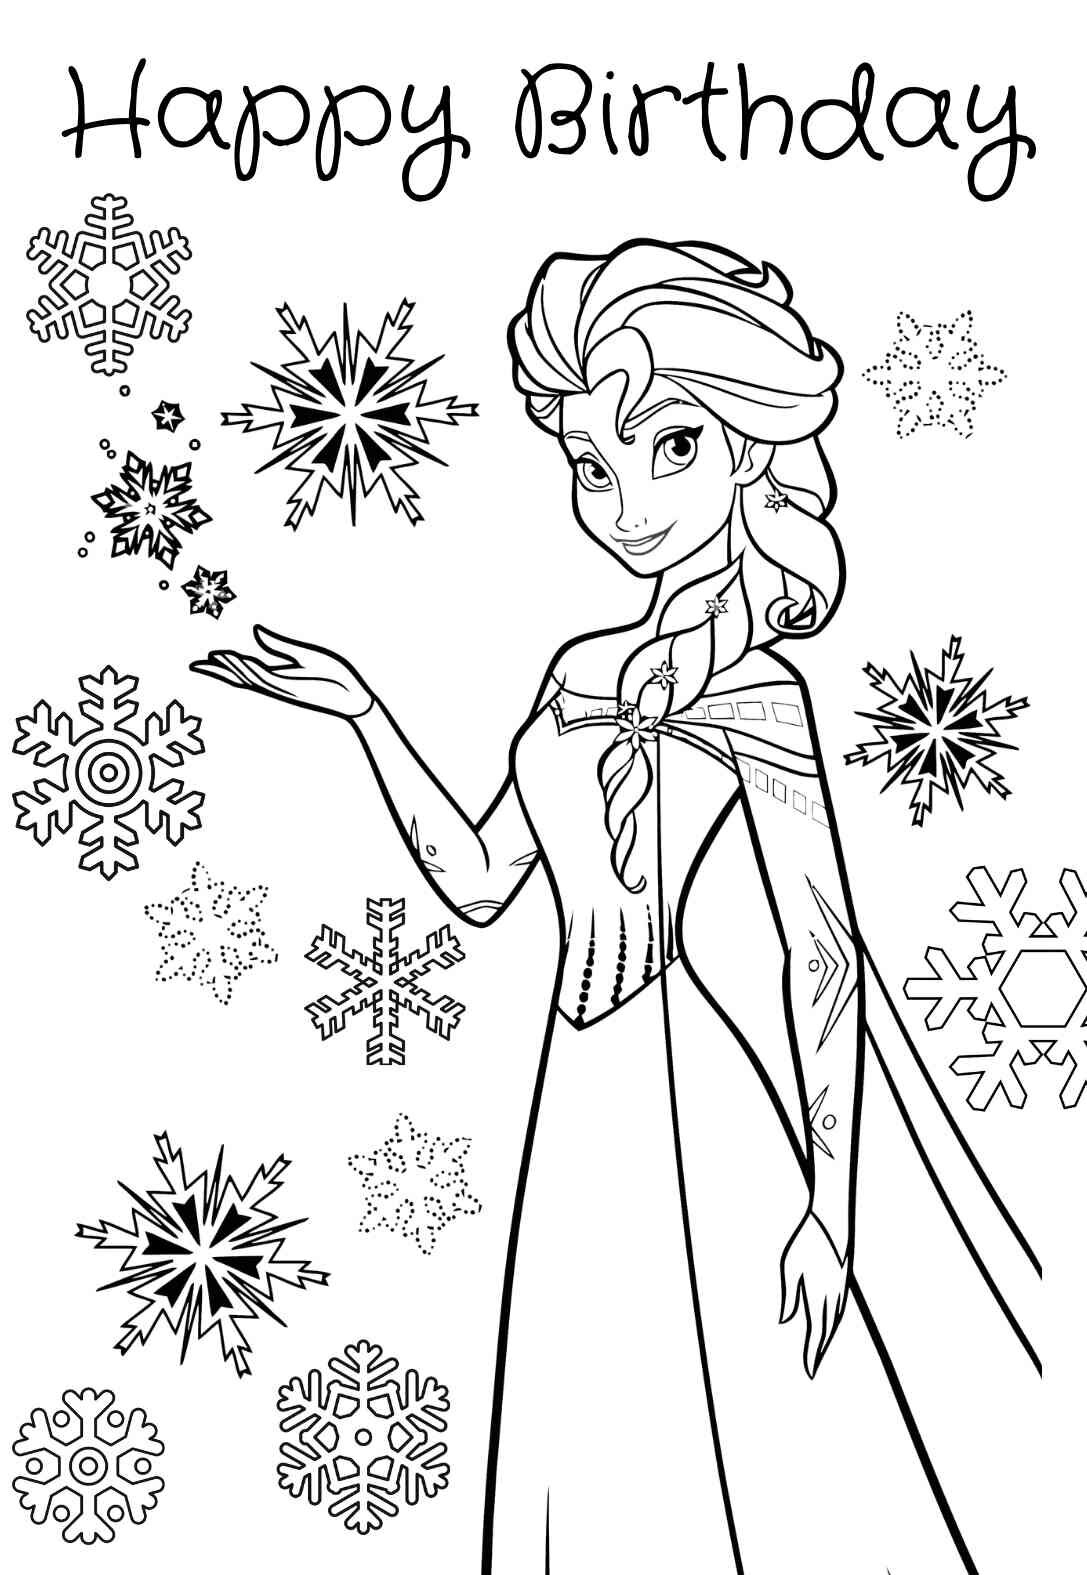 10 Frozen Happy Birthday Coloring Pages for a Frozen Themed Birthday ...